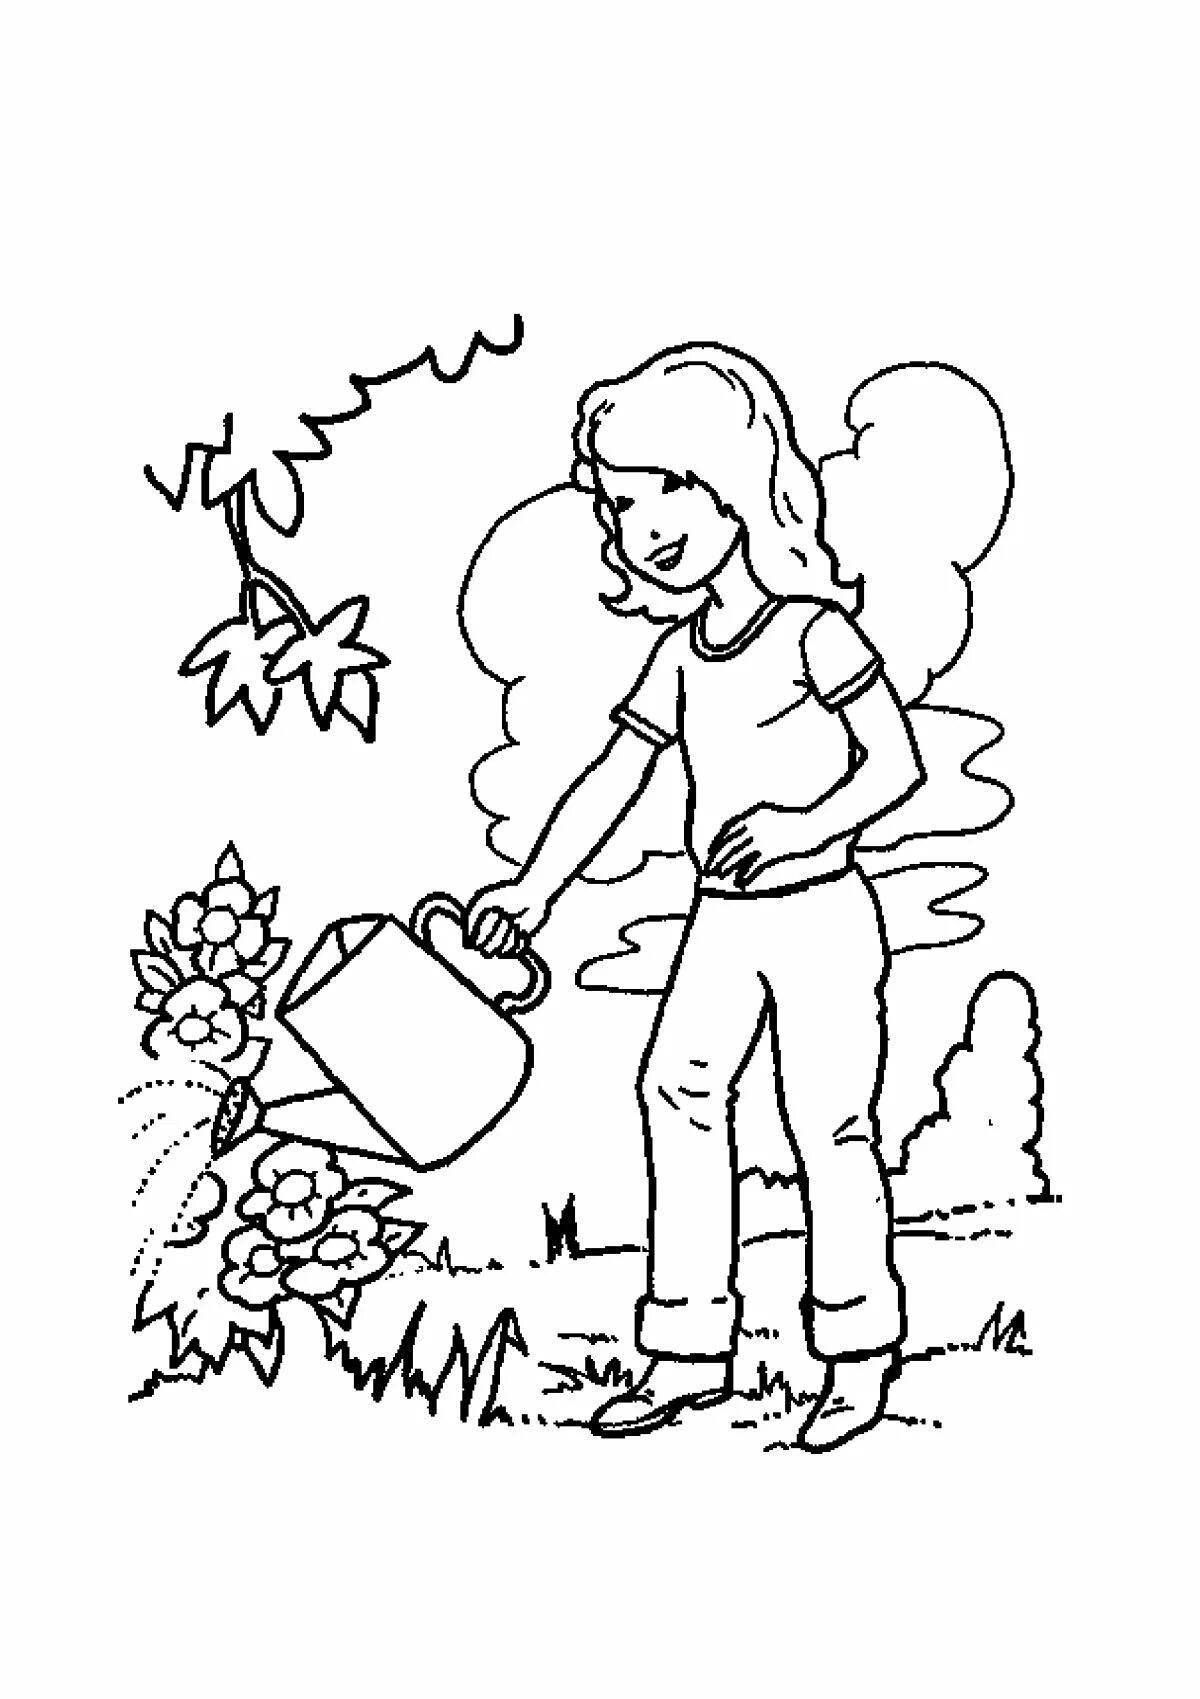 Stimulating environmental coloring book for children